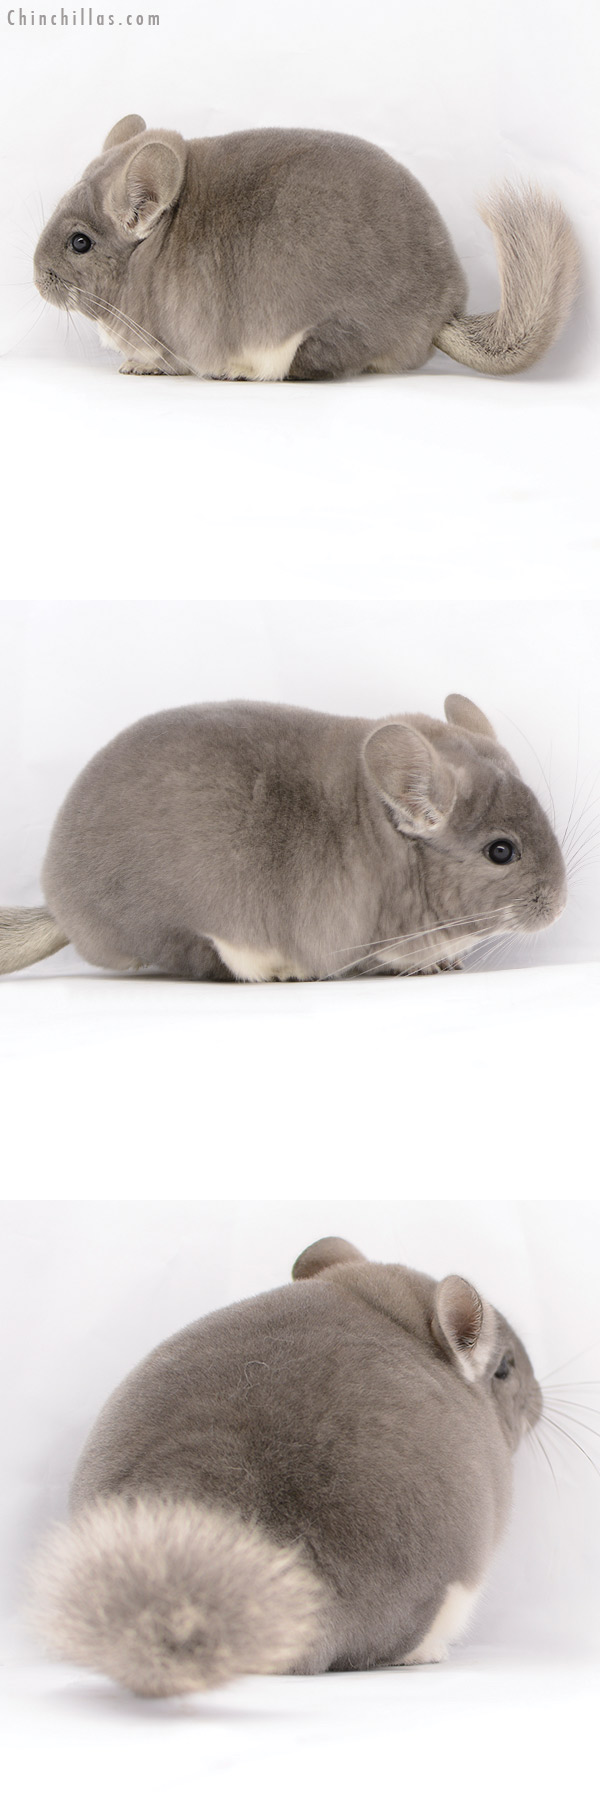 Chinchilla or related item offered for sale or export on Chinchillas.com - 20222 Extra Large Blocky Premium Production Quality Violet Female Chinchilla